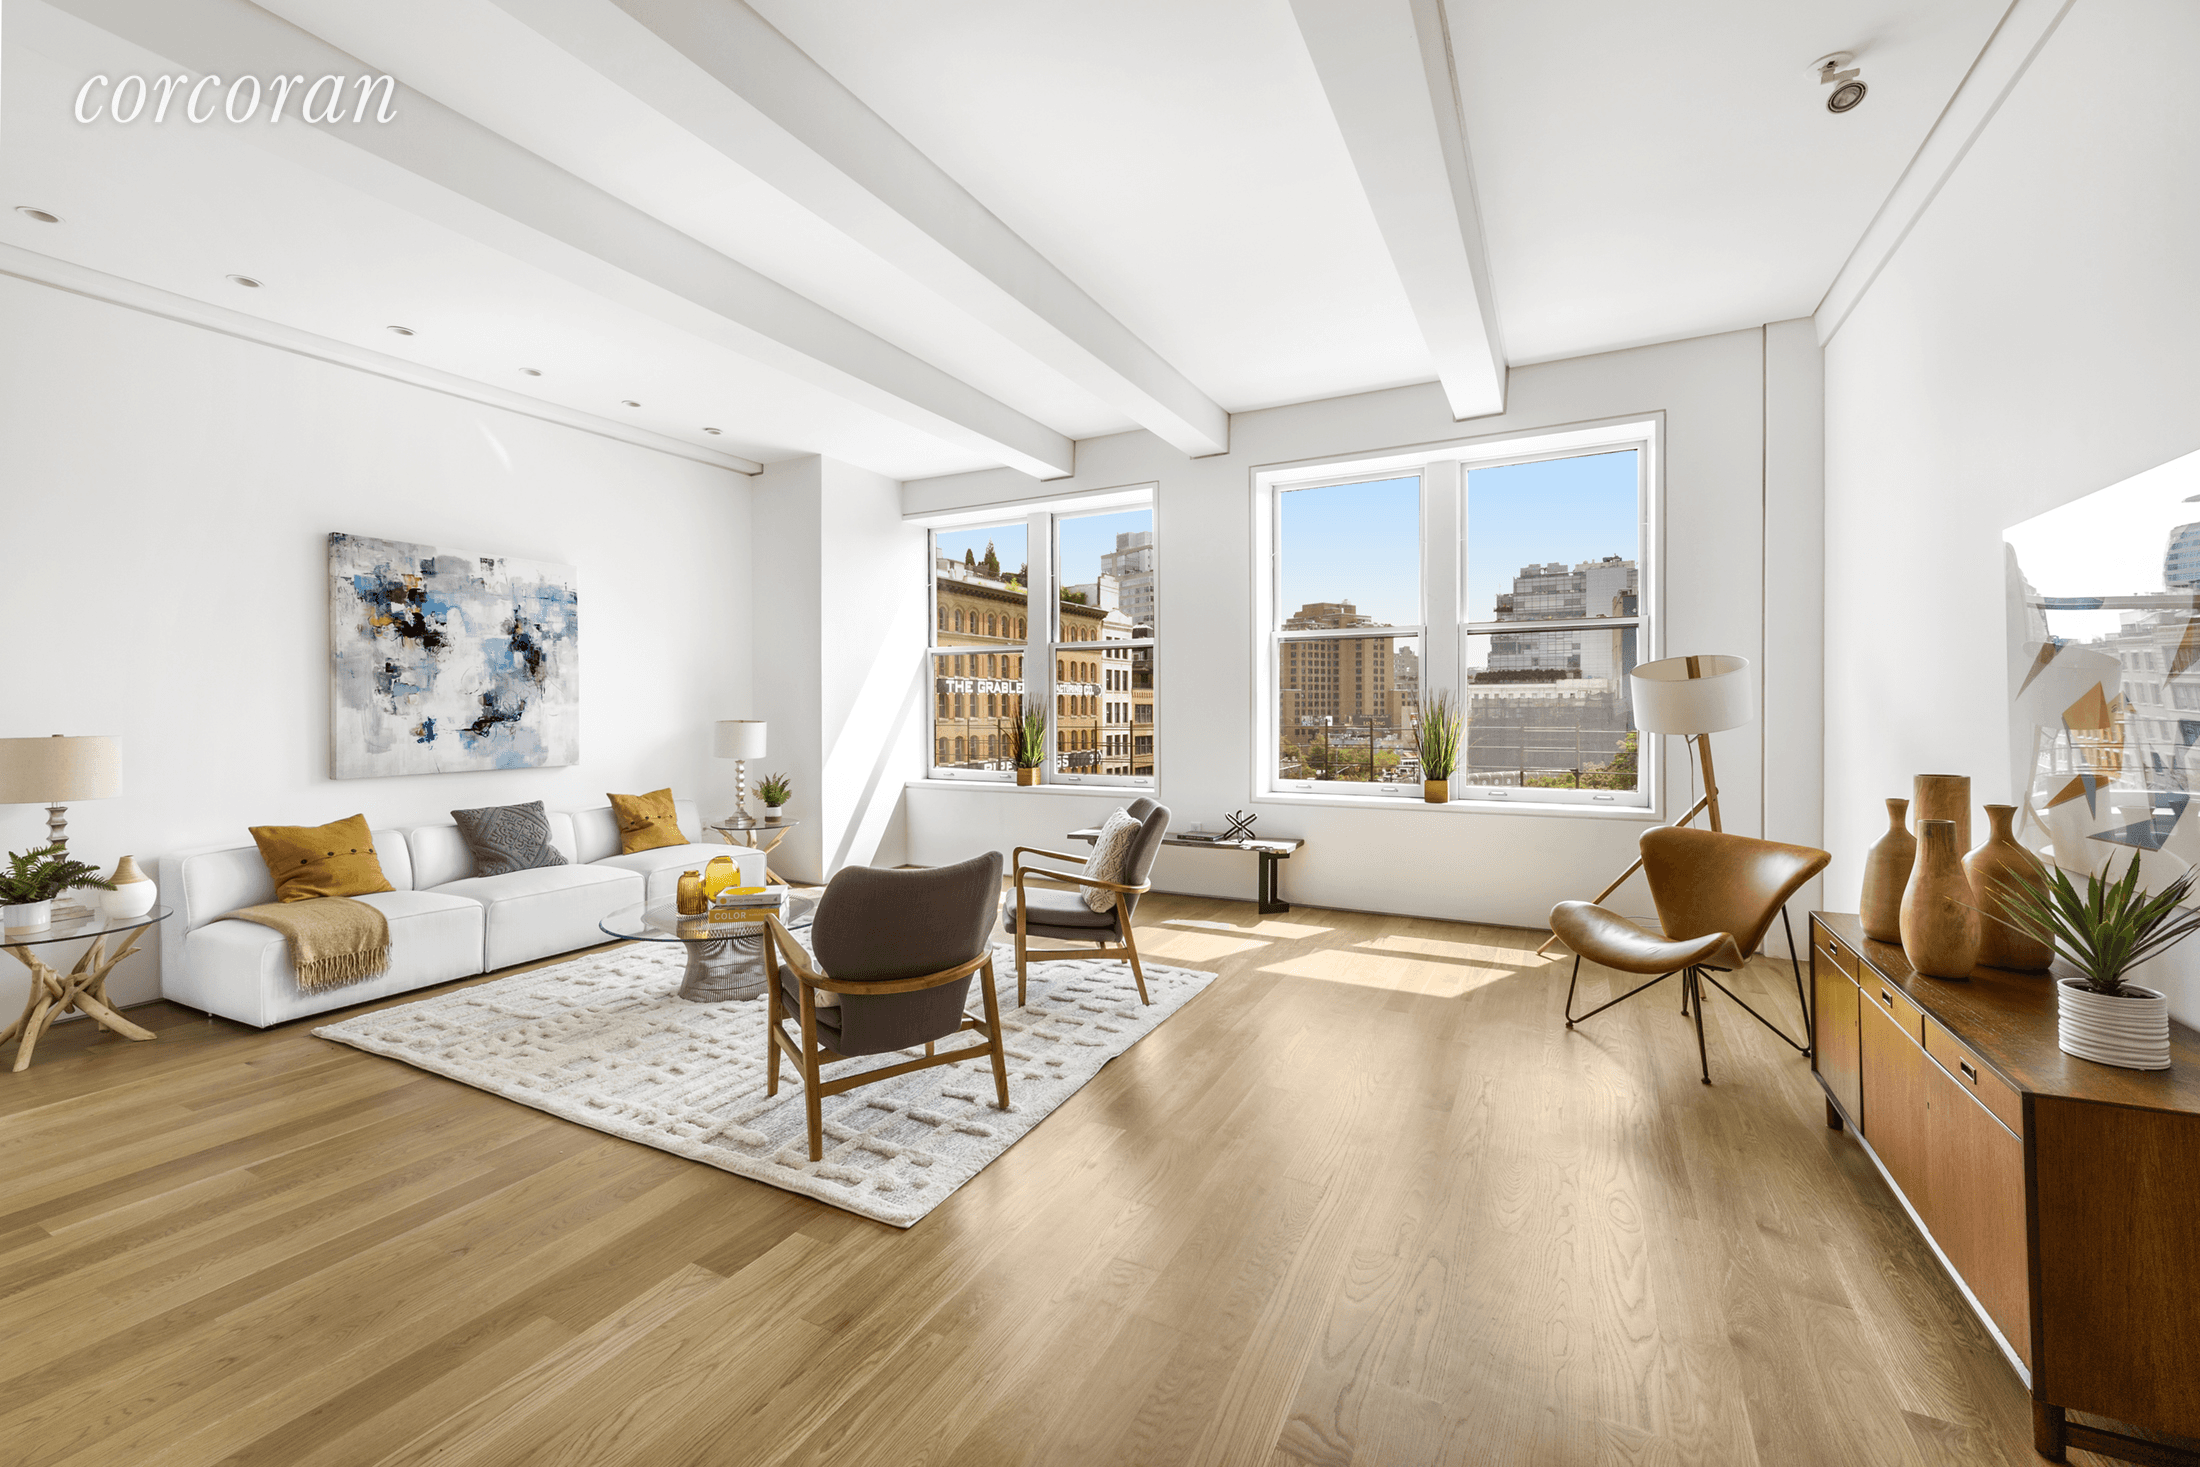 Rarely available, renovated loft in the heart of TriBeCa allows for authentic loft living with modern conveniences.